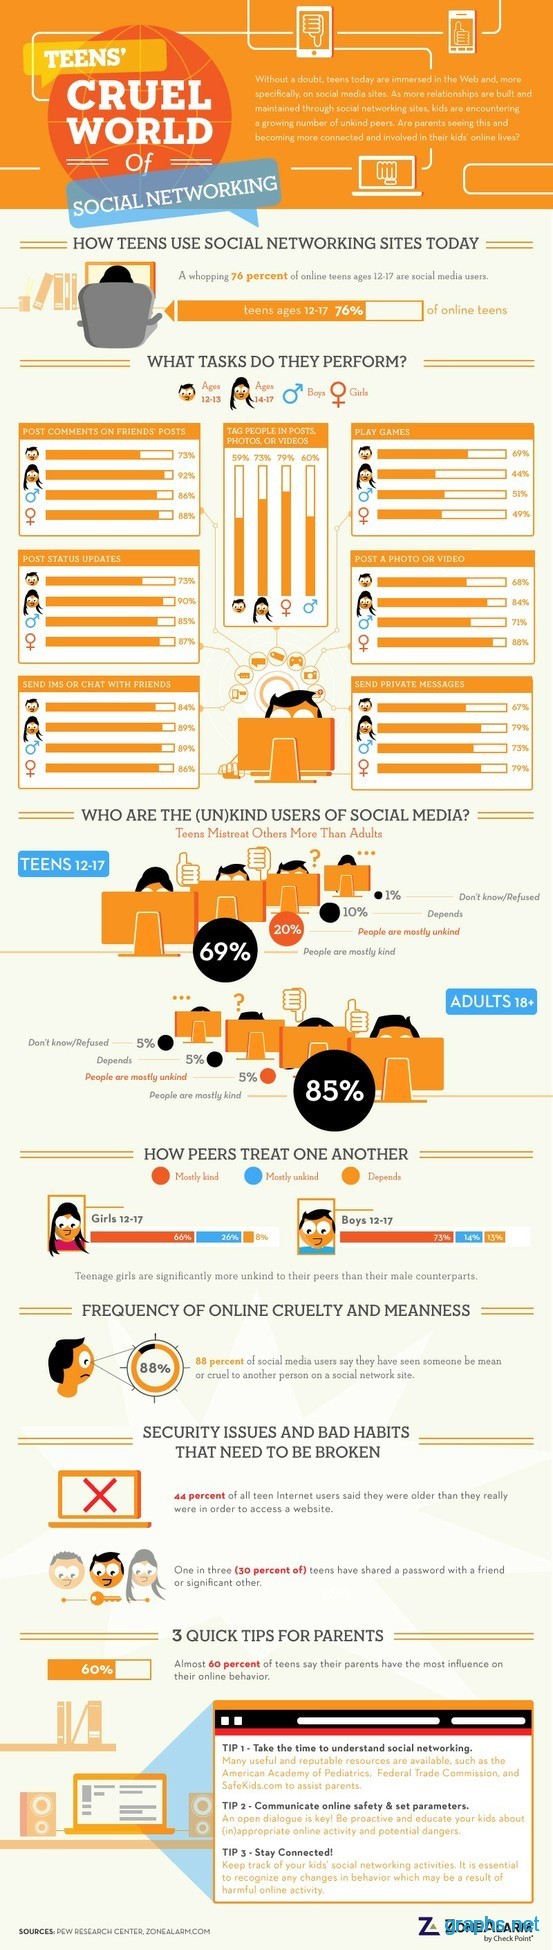 Statistics of Teenagers Using Social Networking Sites